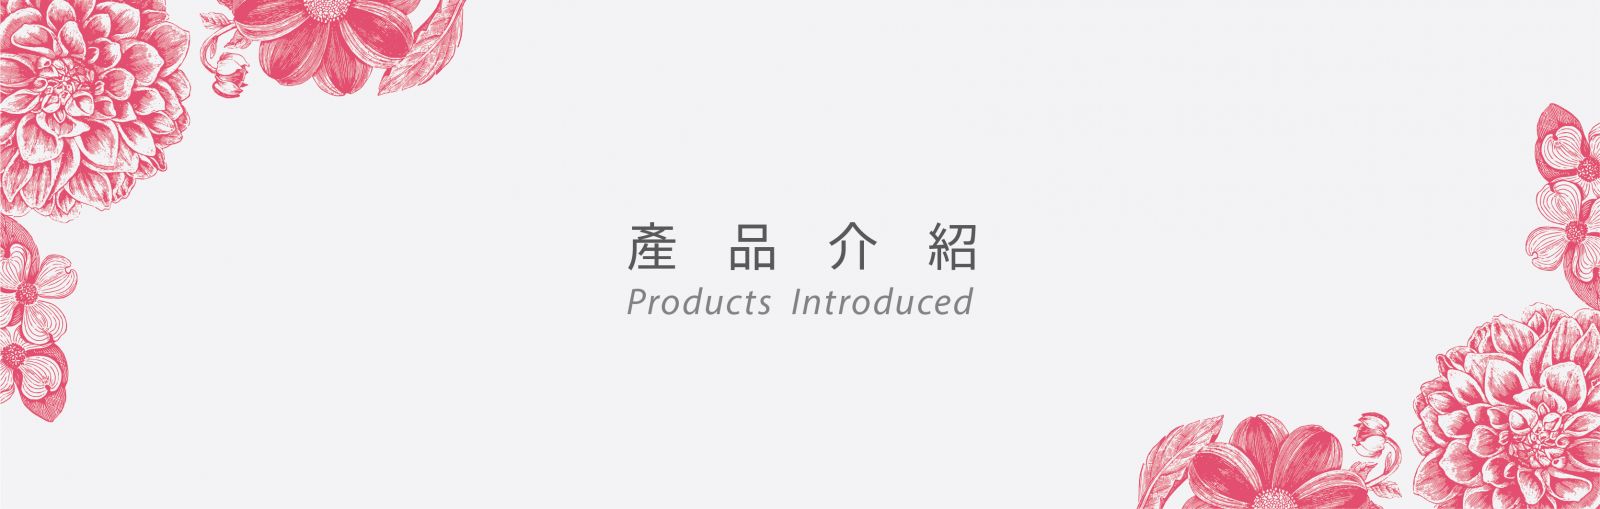 Products Introduced